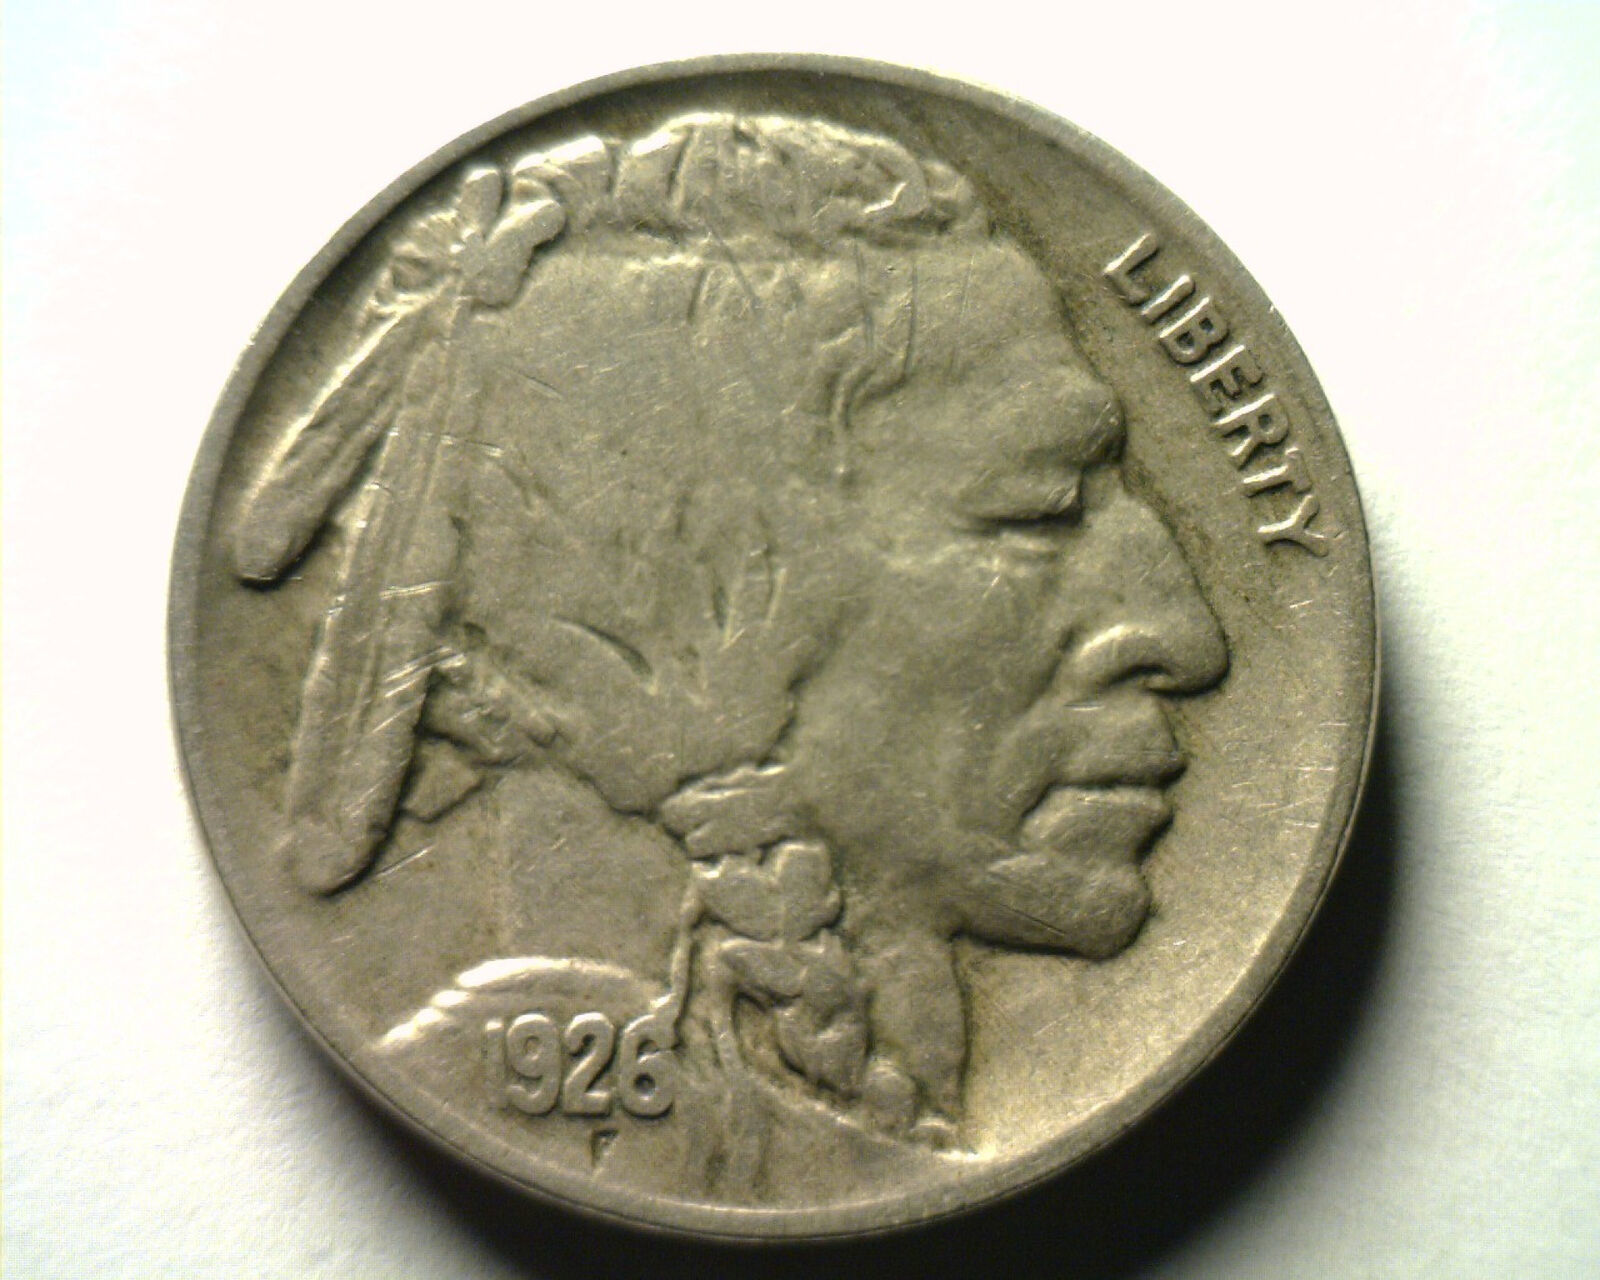 Primary image for 1926 BUFFALO NICKEL EXTRA FINE XF EXTREMELY FINE EF NICE ORIGINAL COIN BOBS COIN